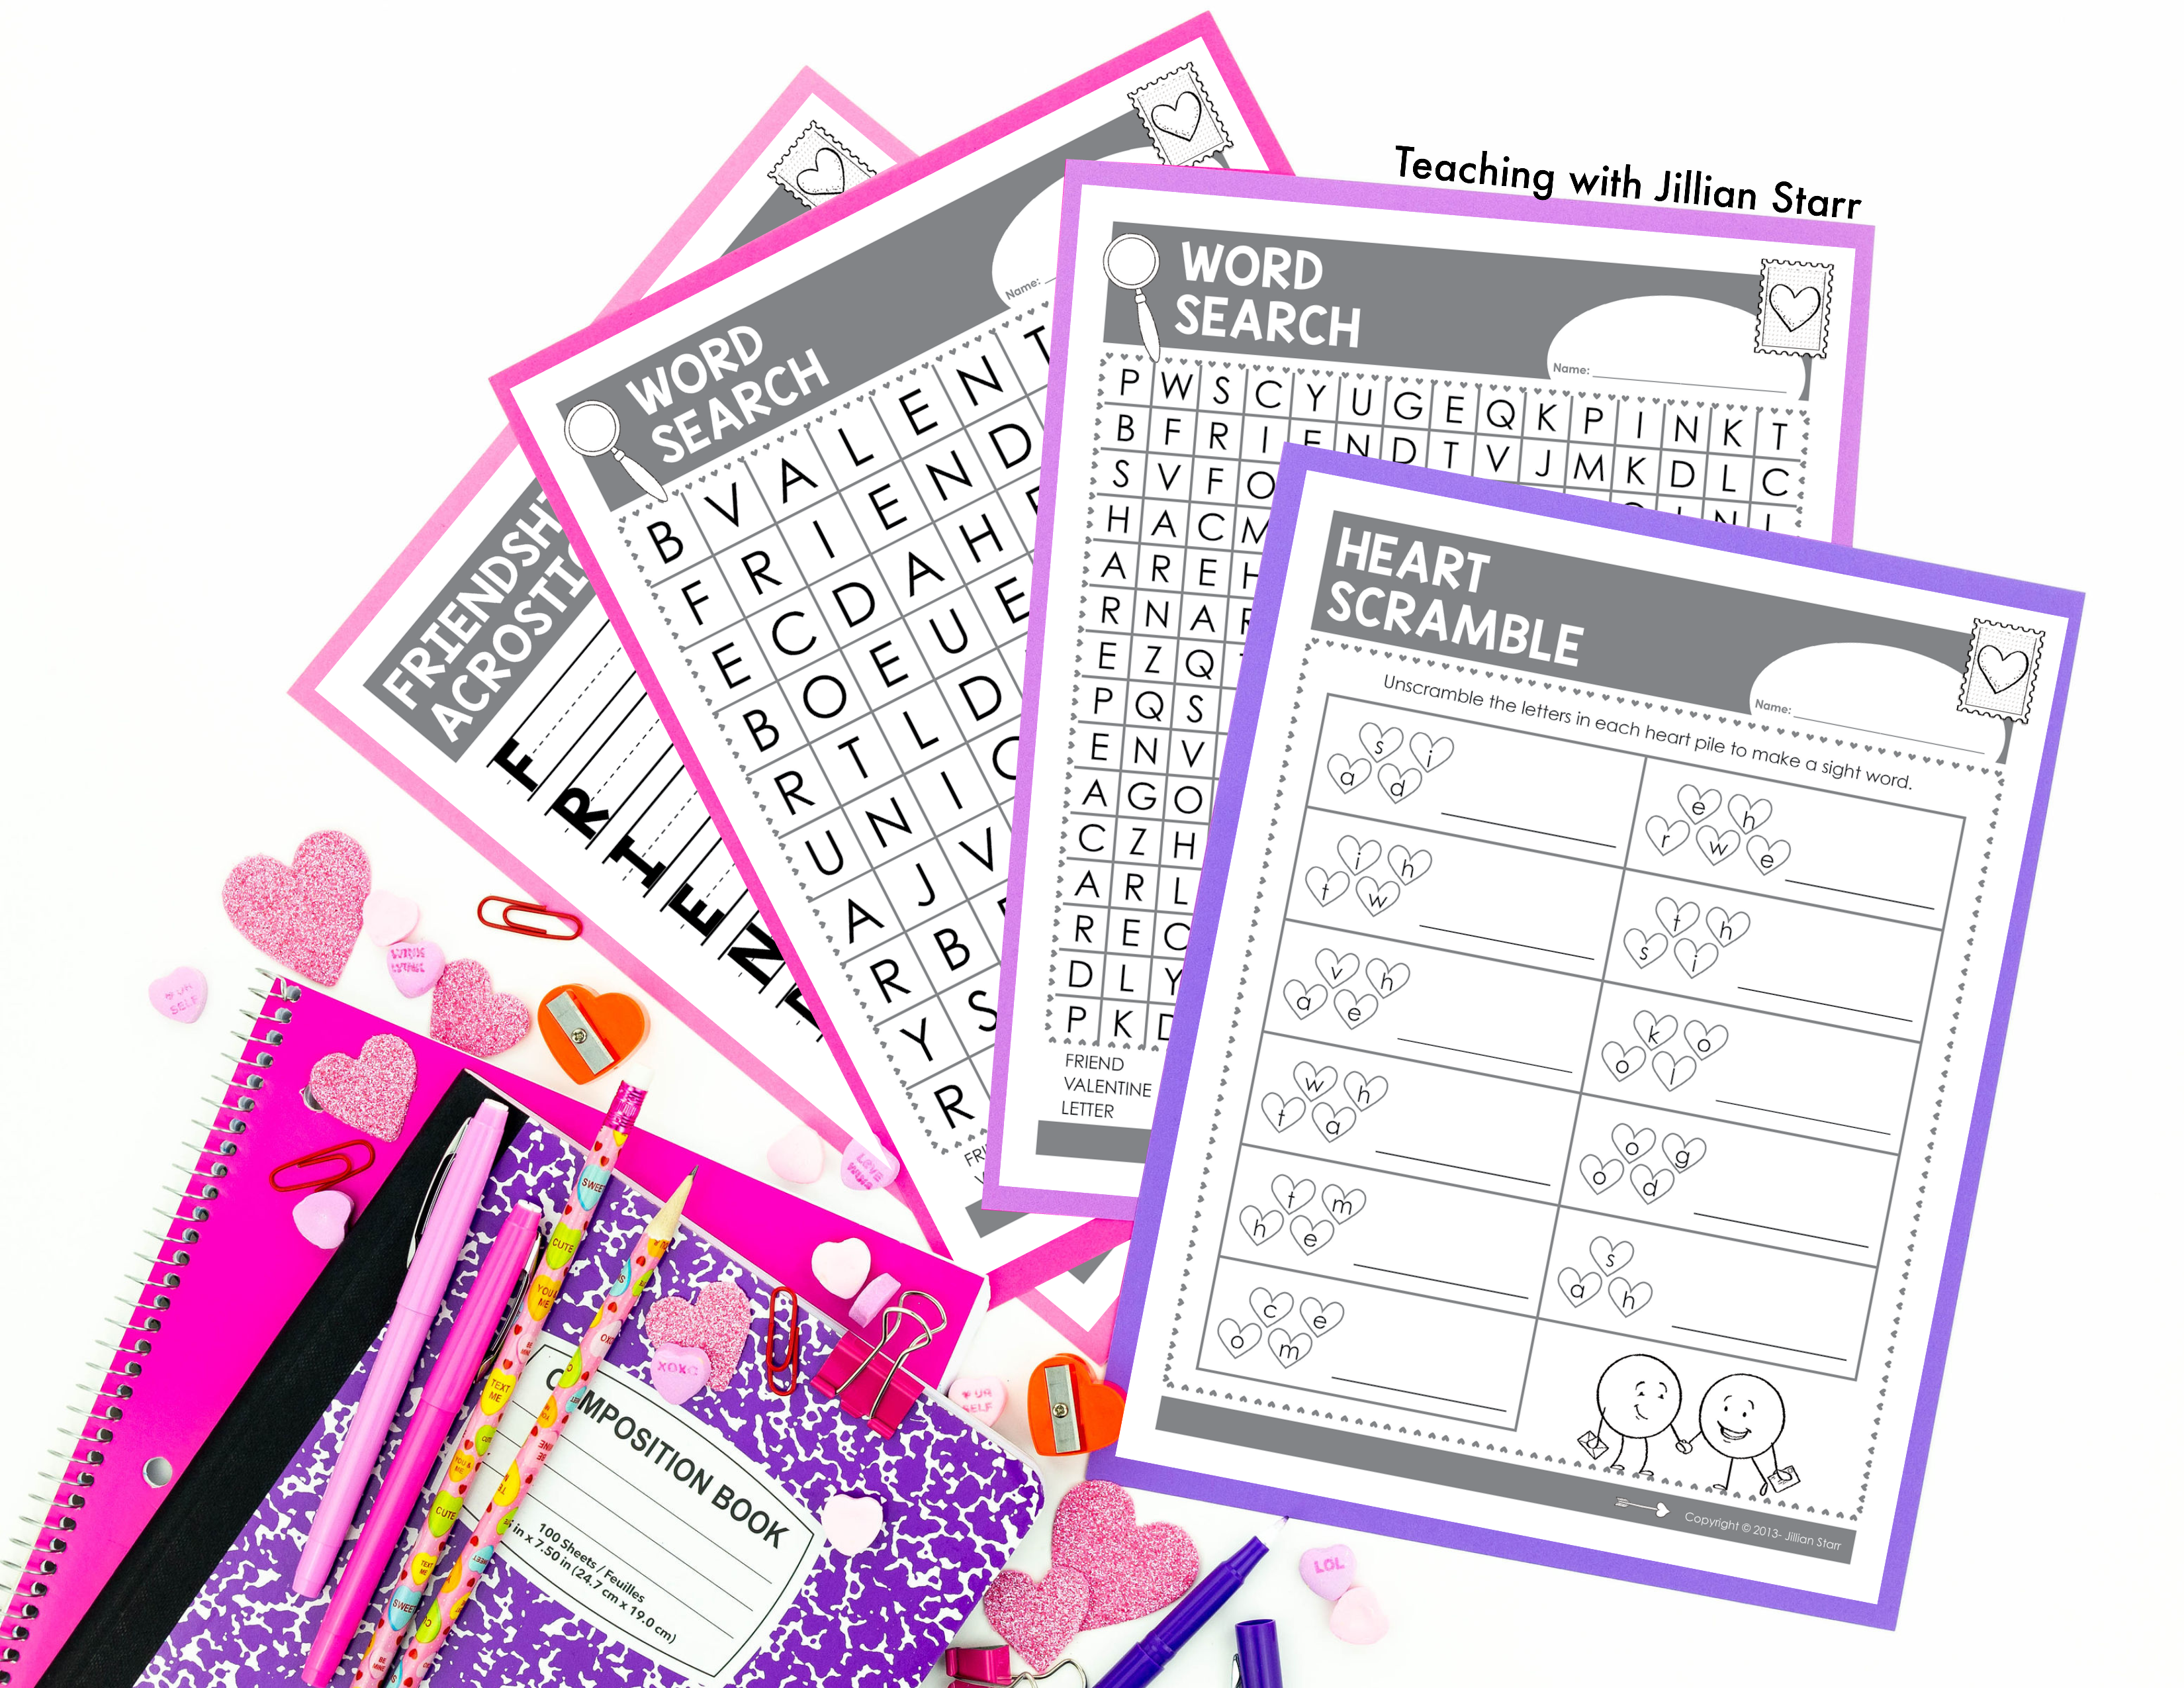 Valentine's Day Word Work! These fun activities are perfect for any first and second grade classroom. Free printable included!